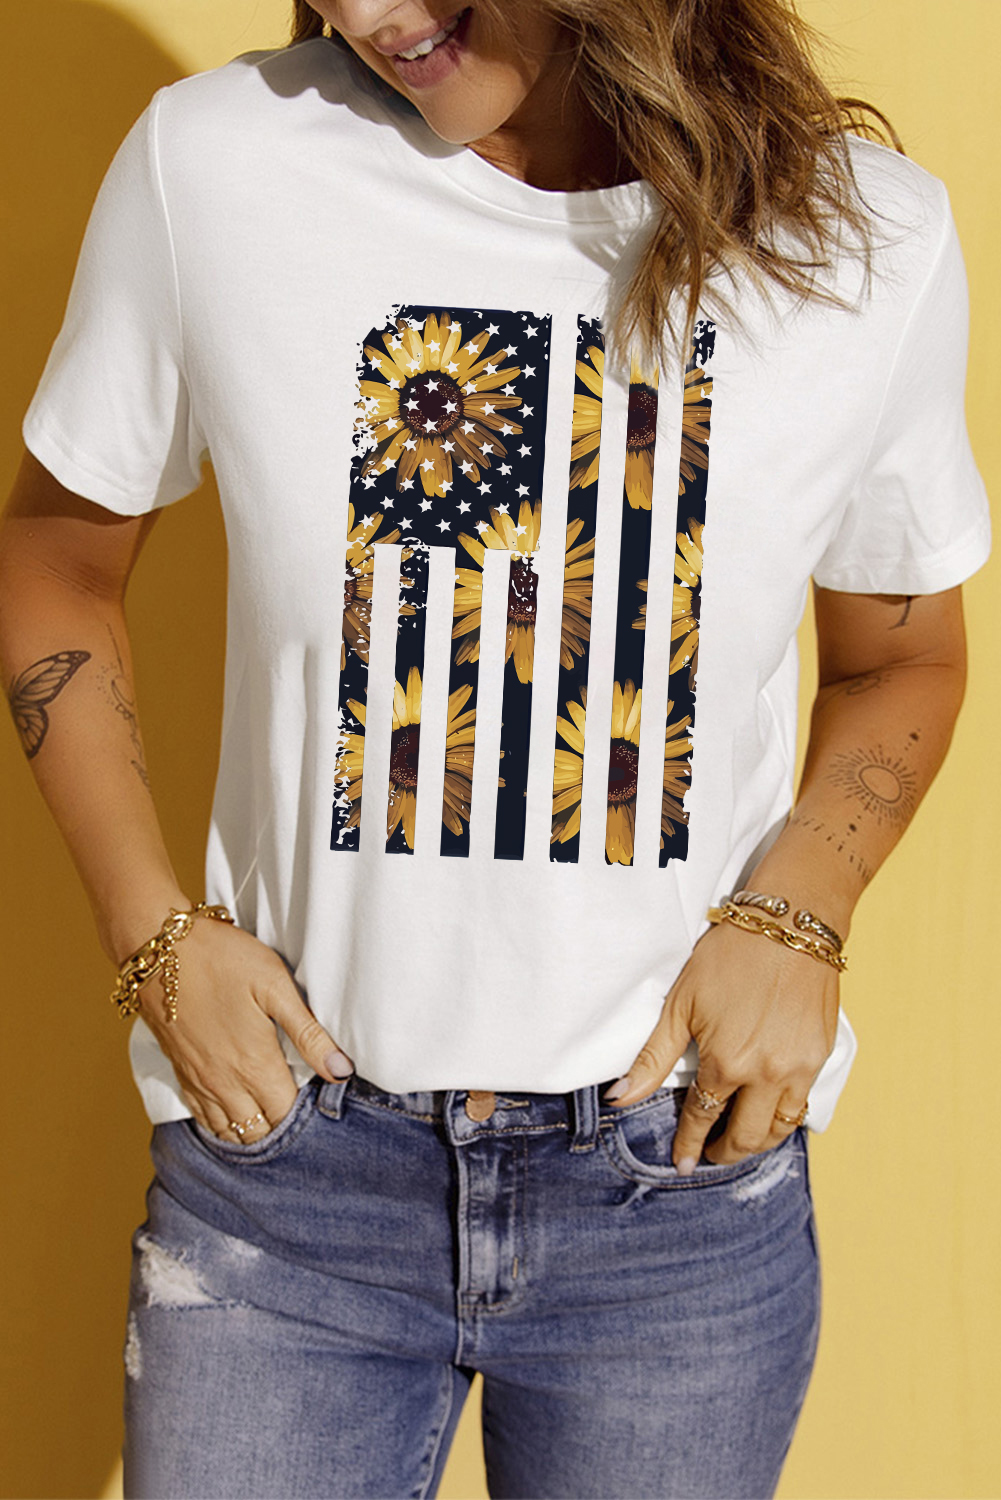 US$ 5.73 Drop-shipping White Sunflower American Flag Short Sleeve T ...